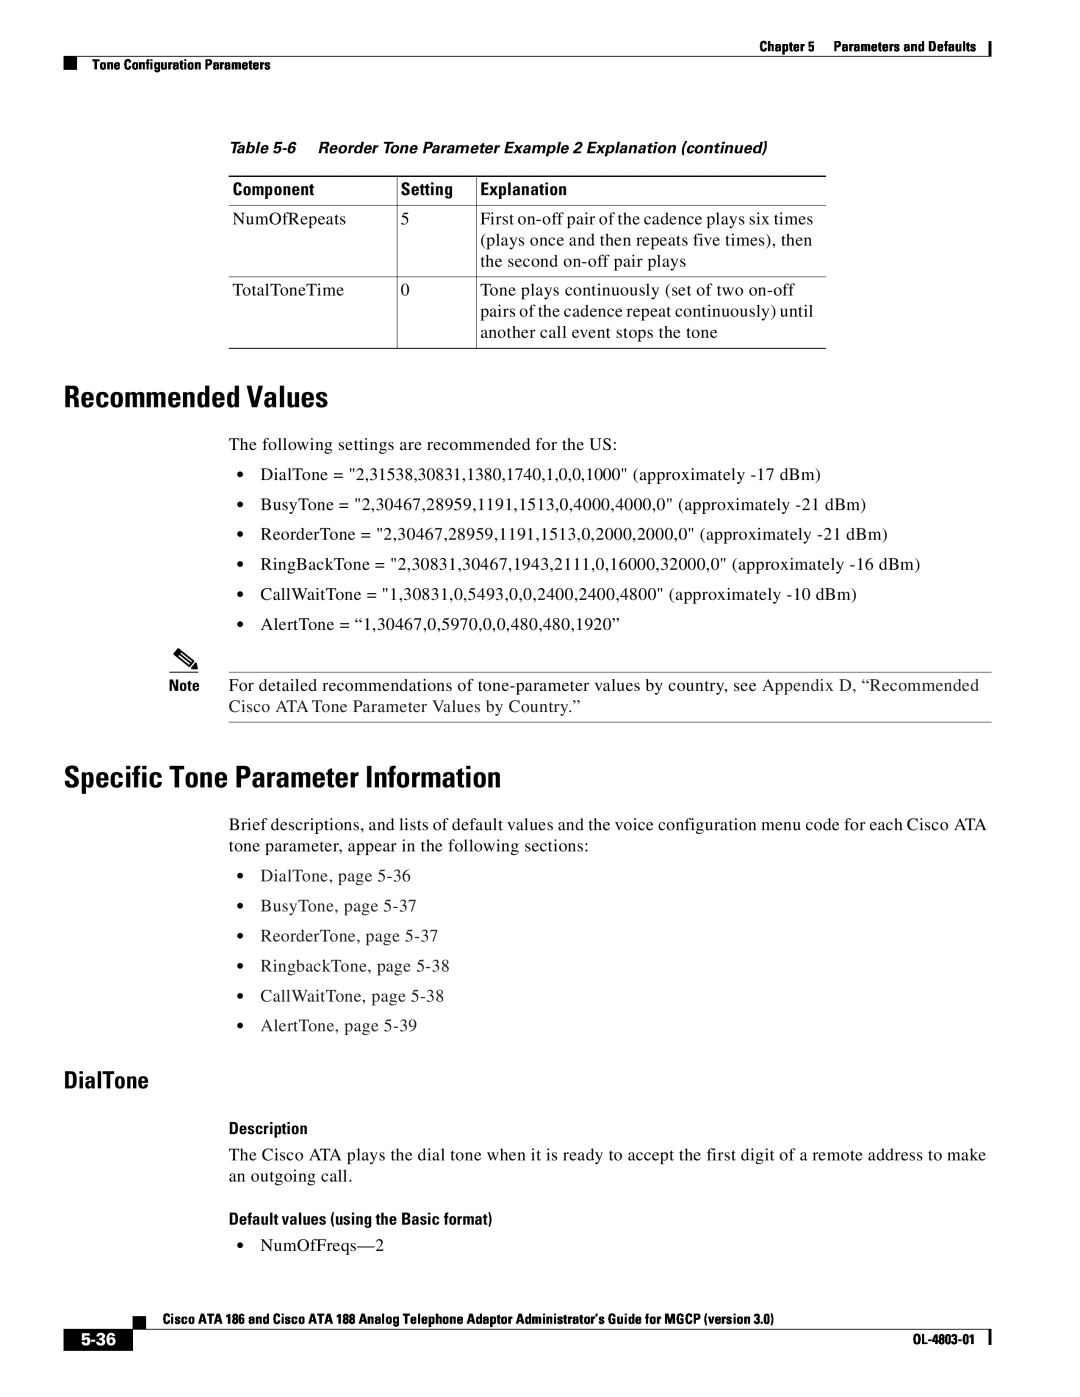 Cisco Systems ATA 186 manual Recommended Values, Specific Tone Parameter Information, DialTone, 5-36, Component, Setting 